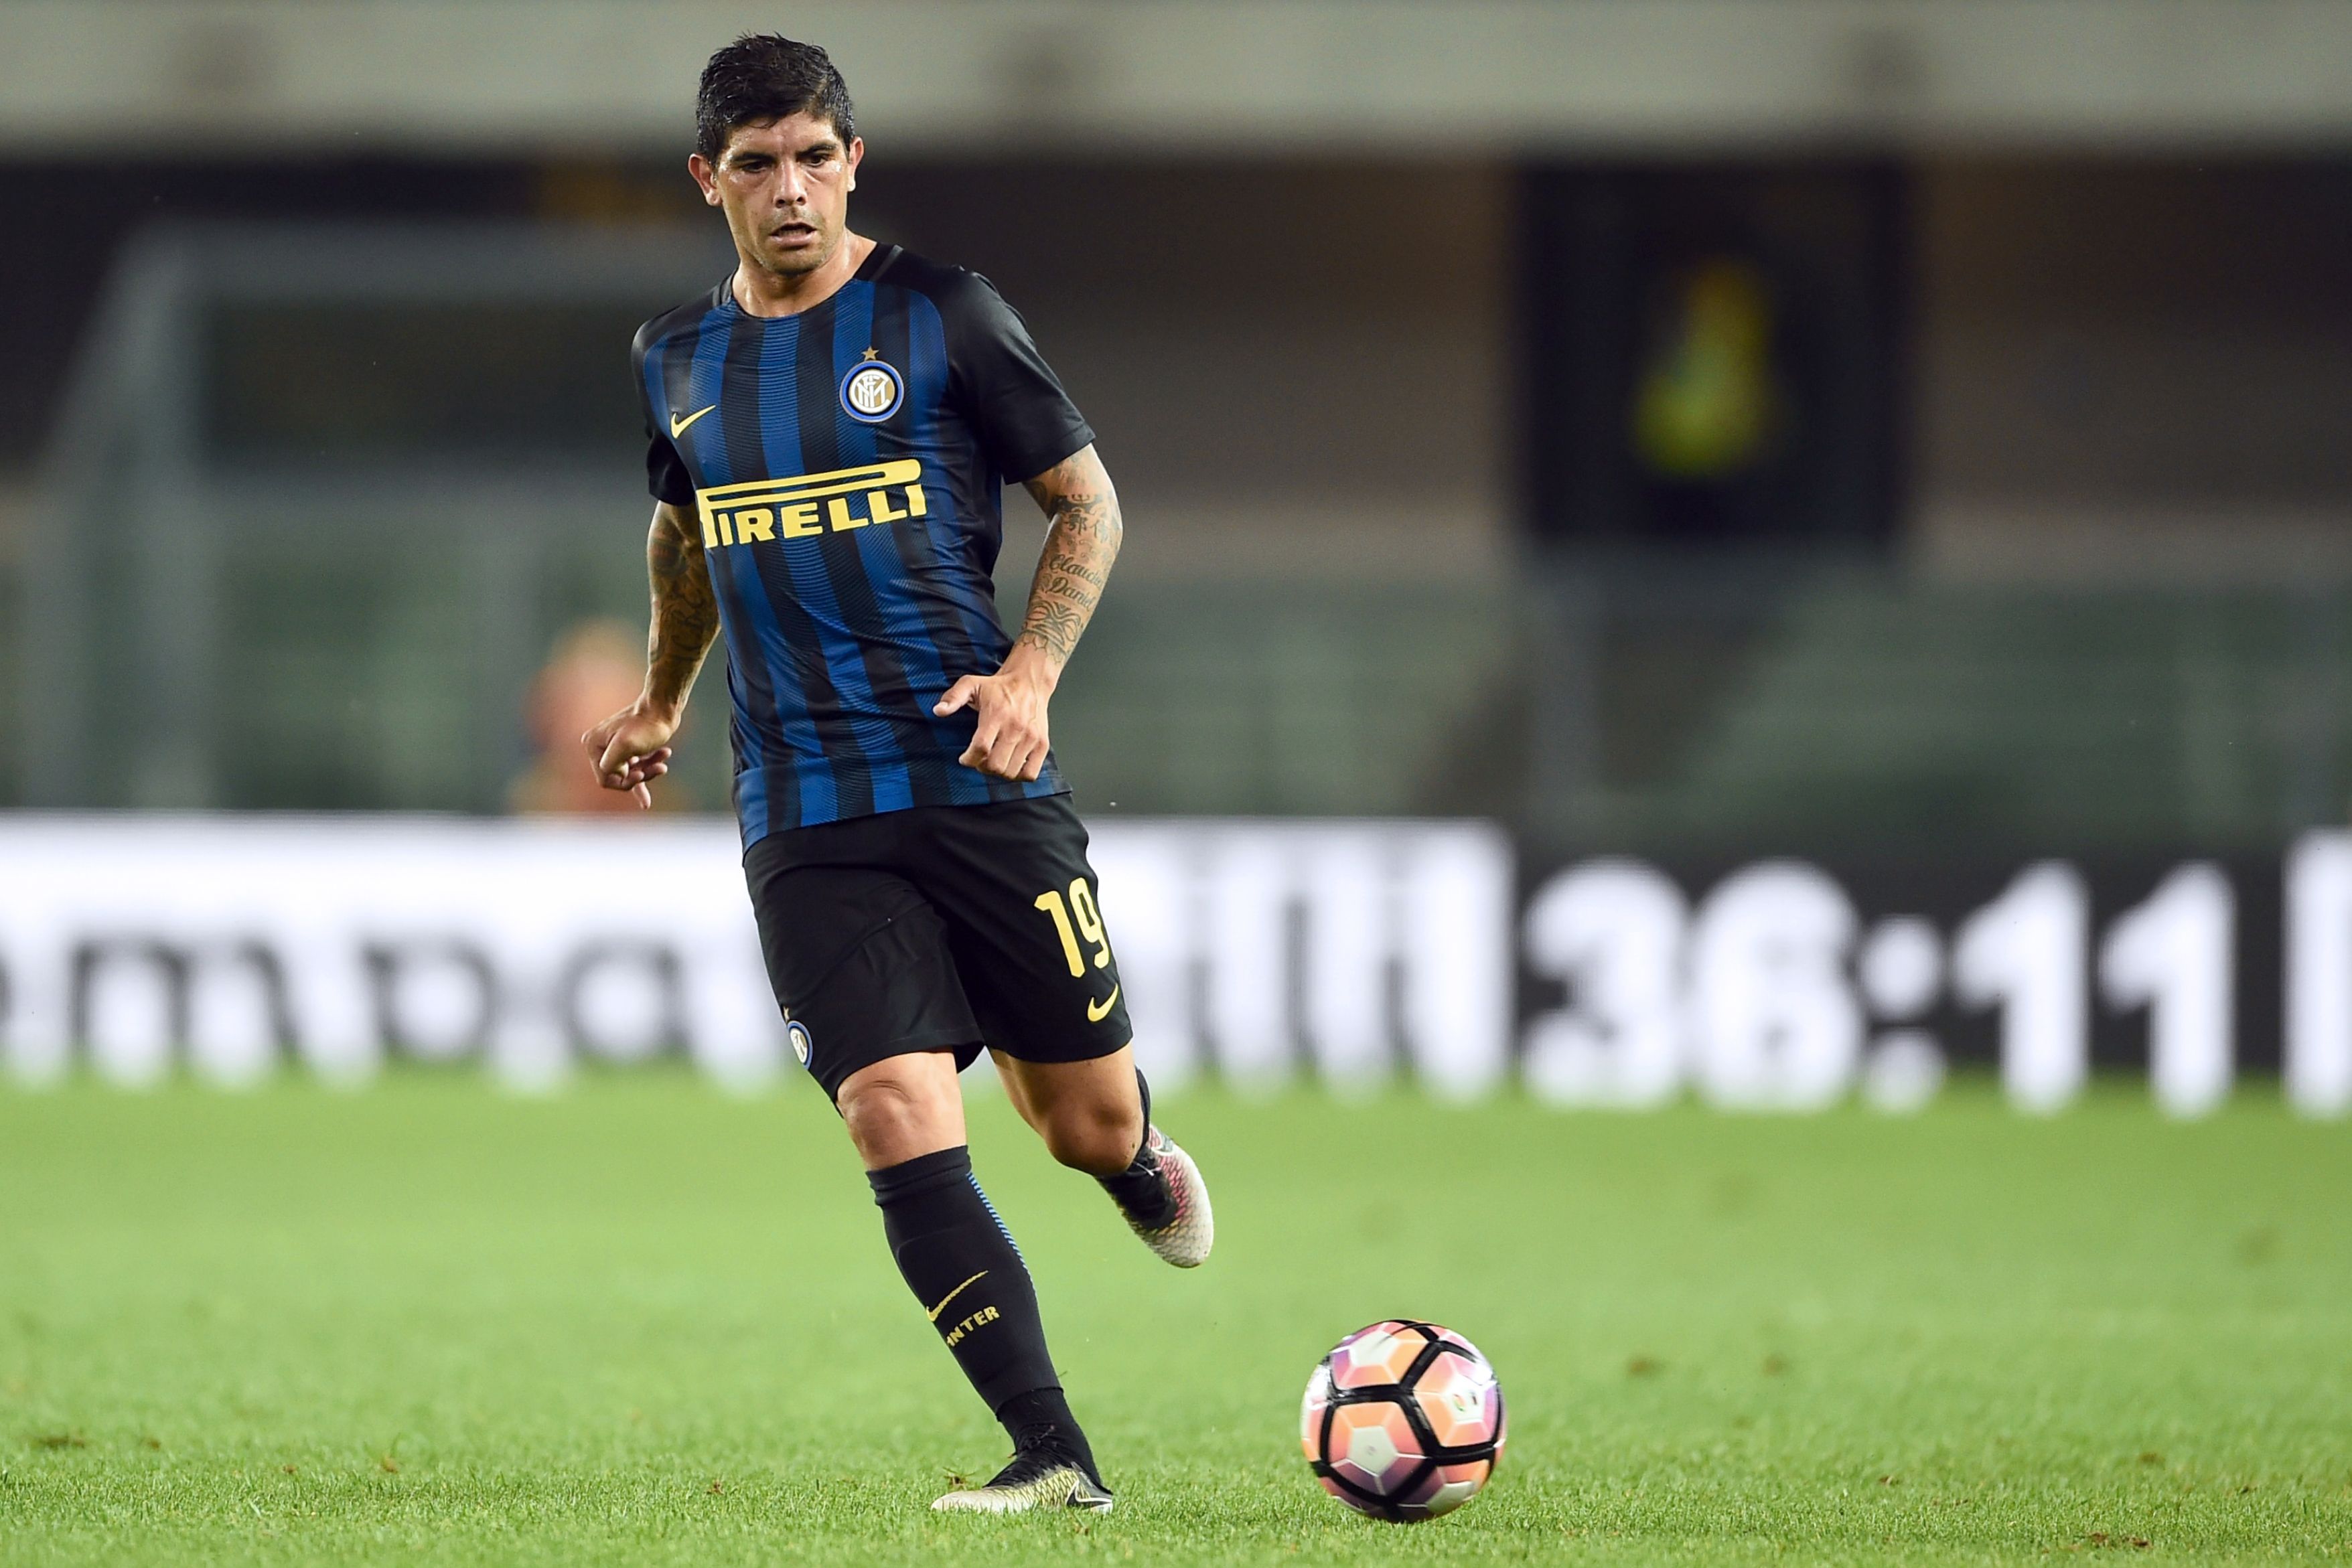 Inter Milan's Argentinian midfielder Ever Banega controls the ball during the Italian Serie A Football match between Chievo and Inter Milan at "Marcantonio Bentegodi" Stadium in Verona, on August 21, 2016. / AFP / GIUSEPPE CACACE        (Photo credit should read GIUSEPPE CACACE/AFP/Getty Images)